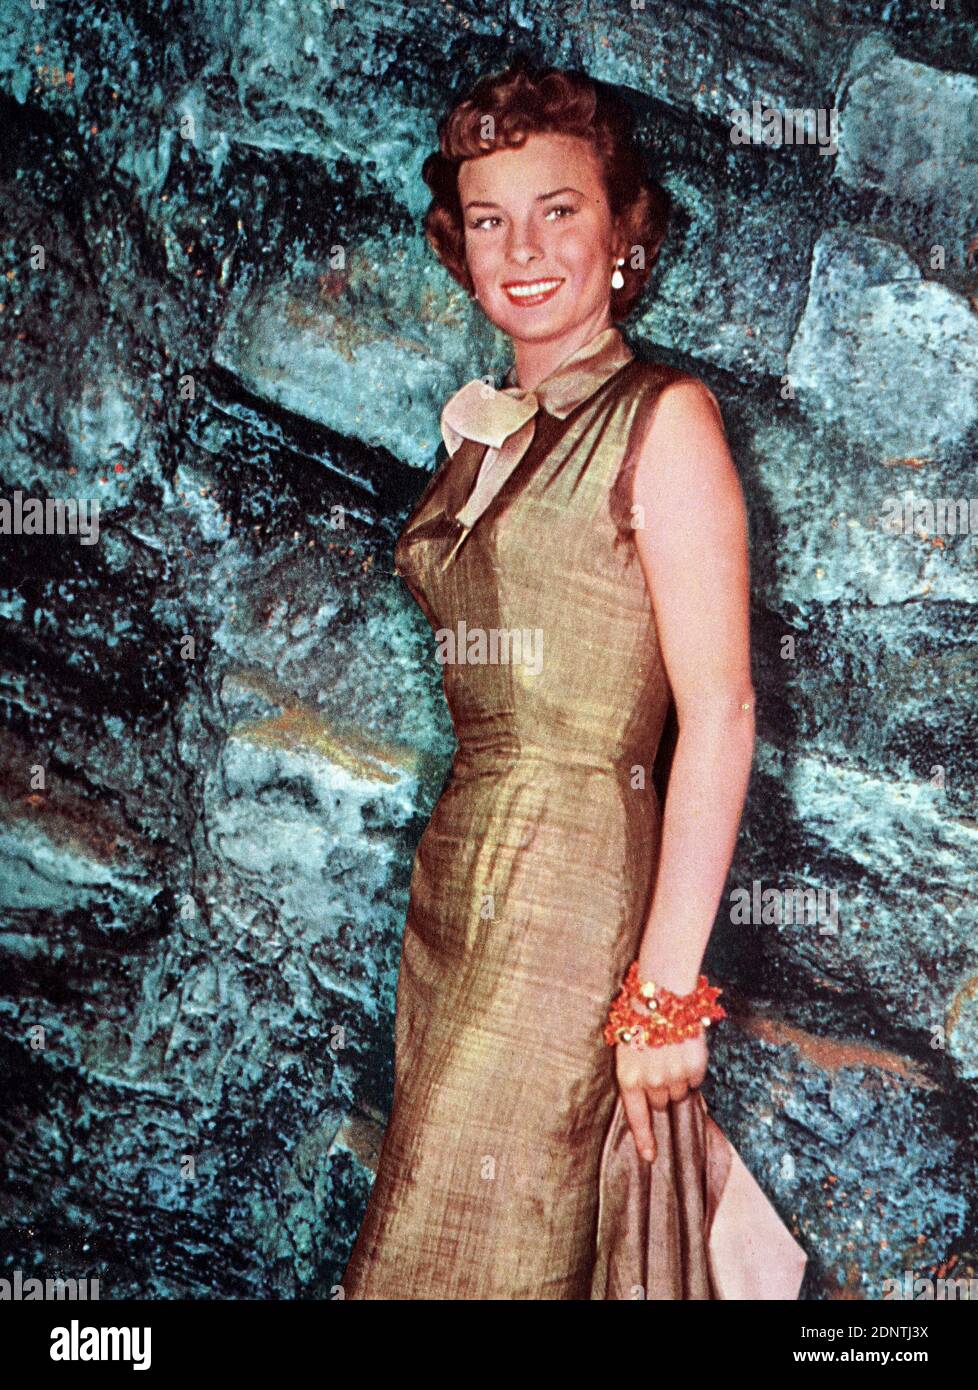 Film still of Jean Peters (1926-2000) from 'Three Coins in the Fountain'. Stock Photo